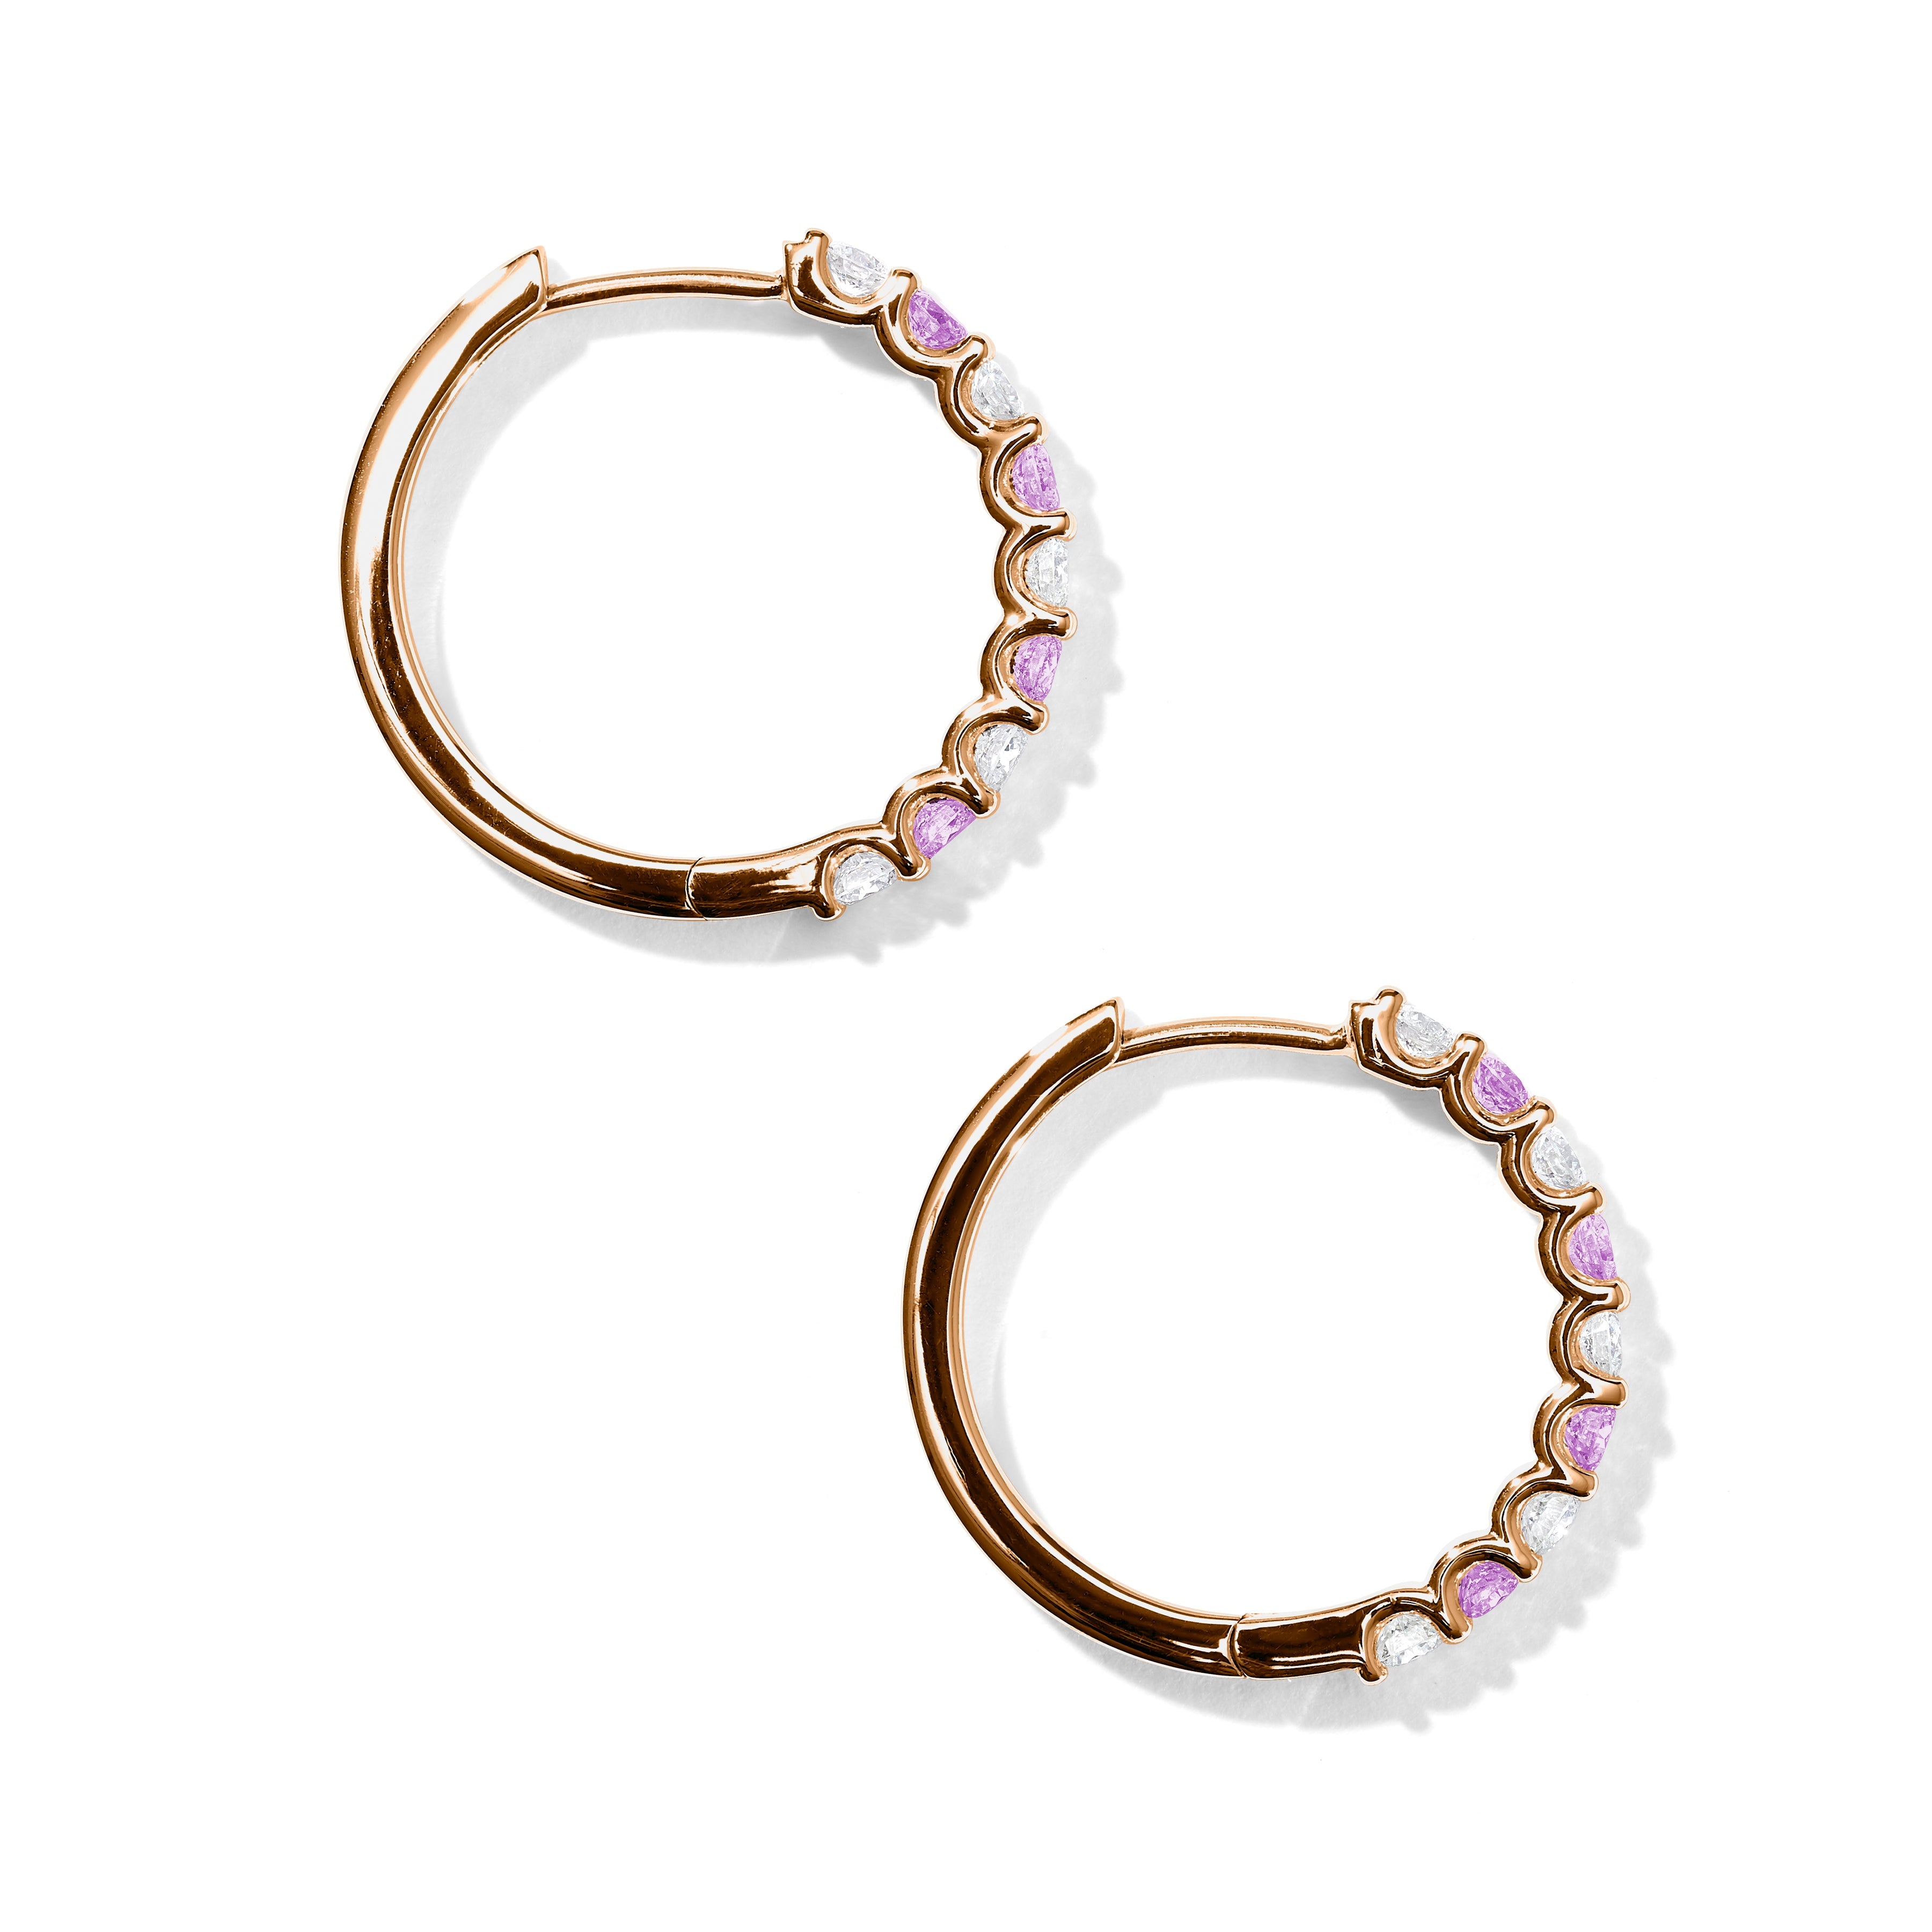 TRY BEFORE YOU BUY - Bellezza Due Colori Hoops